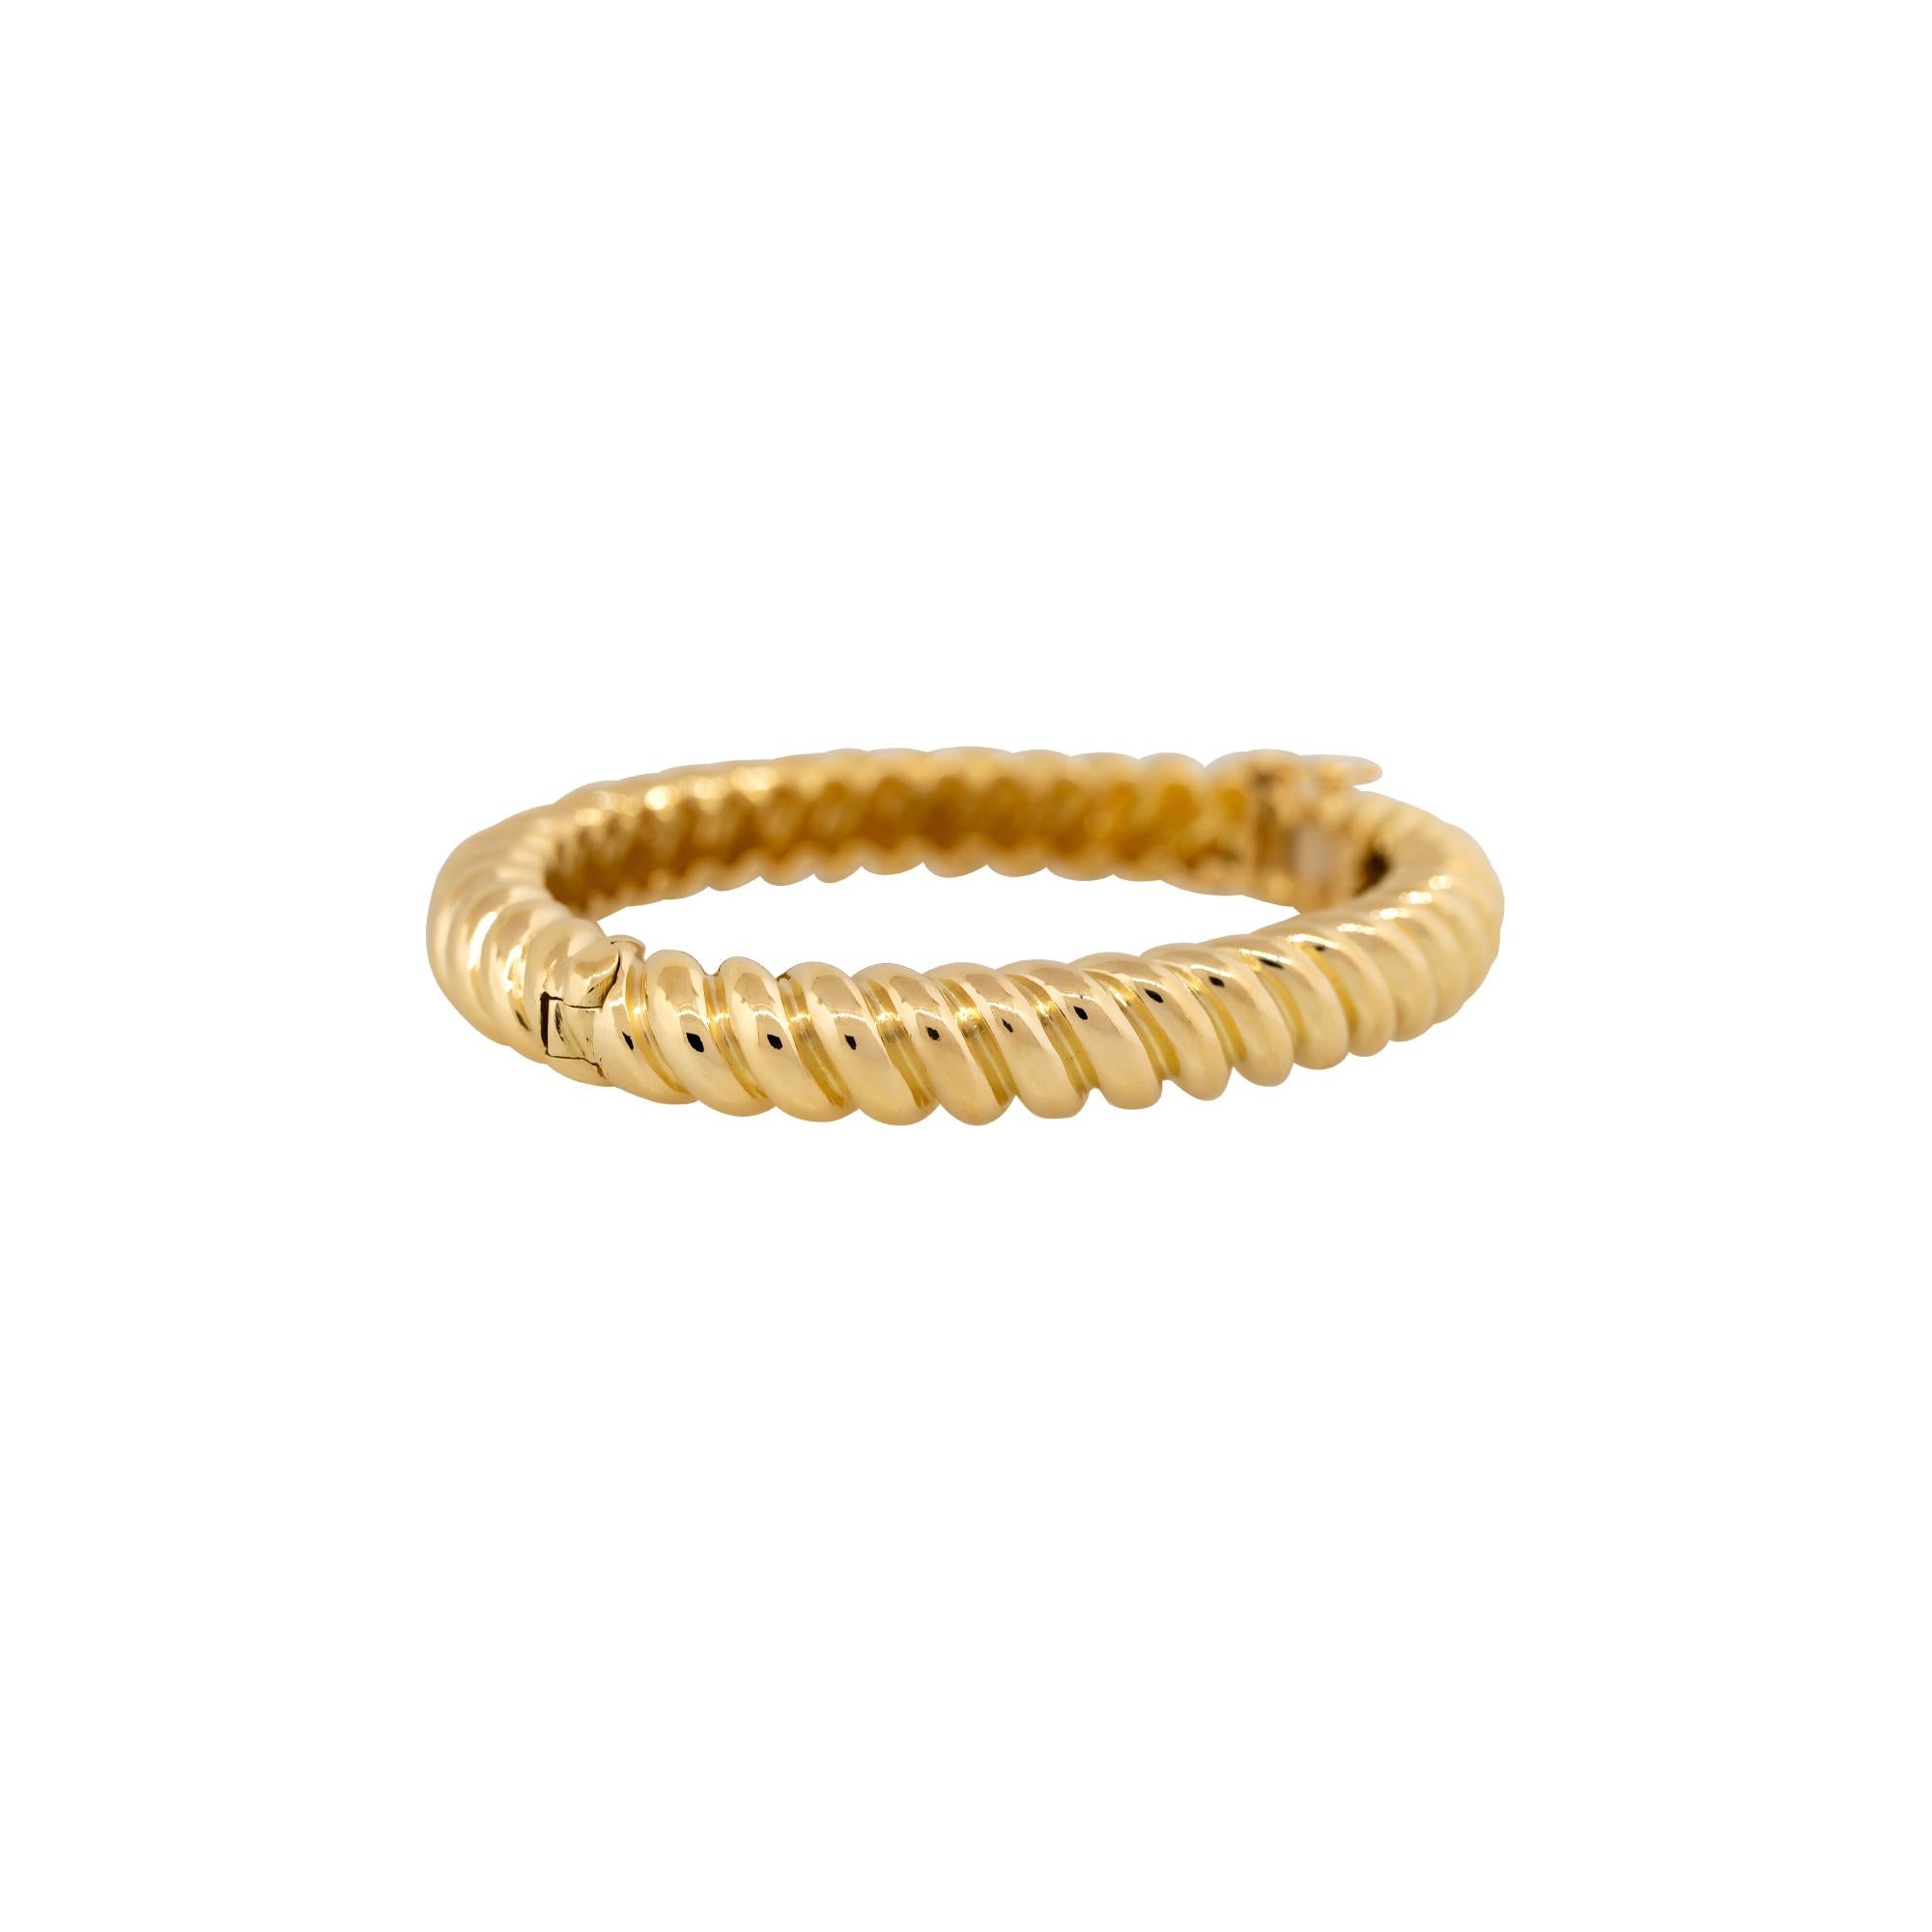 18k Yellow Gold Oval Shaped Ribbed Bangle Bracelet
Material: 18K Yellow Gold
Diamond Details: n/a
 Diamond Clarity: n/a
Diamond Color: n/a
Total Weight: 44.7g (28.9dwt)
Size: This bracelet is approximately 6.5 inches in length
Additional Details: